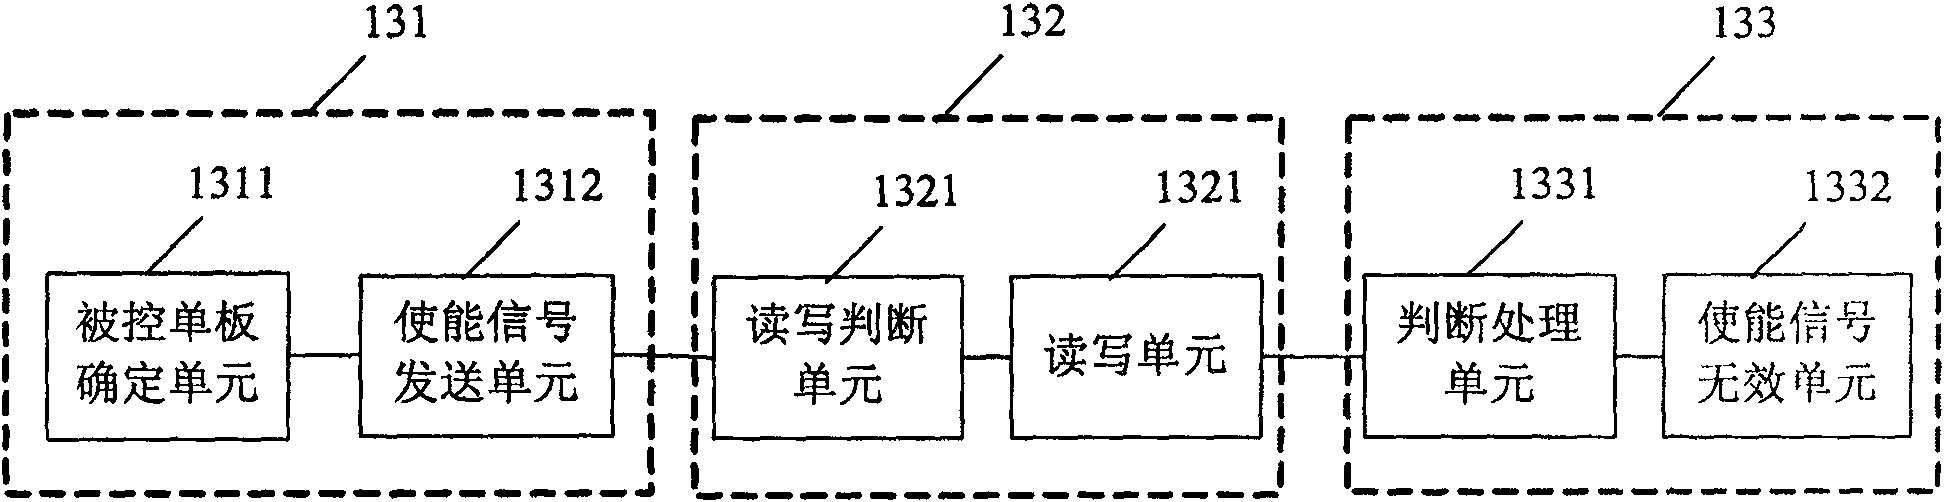 Individual board electronic tag read-write control system and method